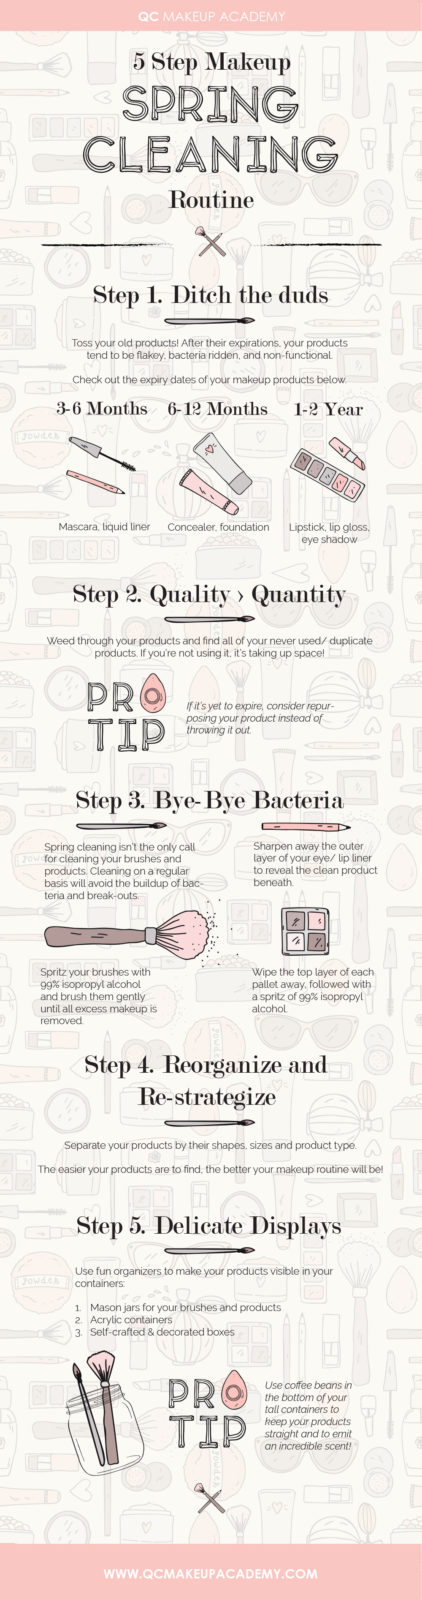 5 Step Makeup Spring Cleaning Routine